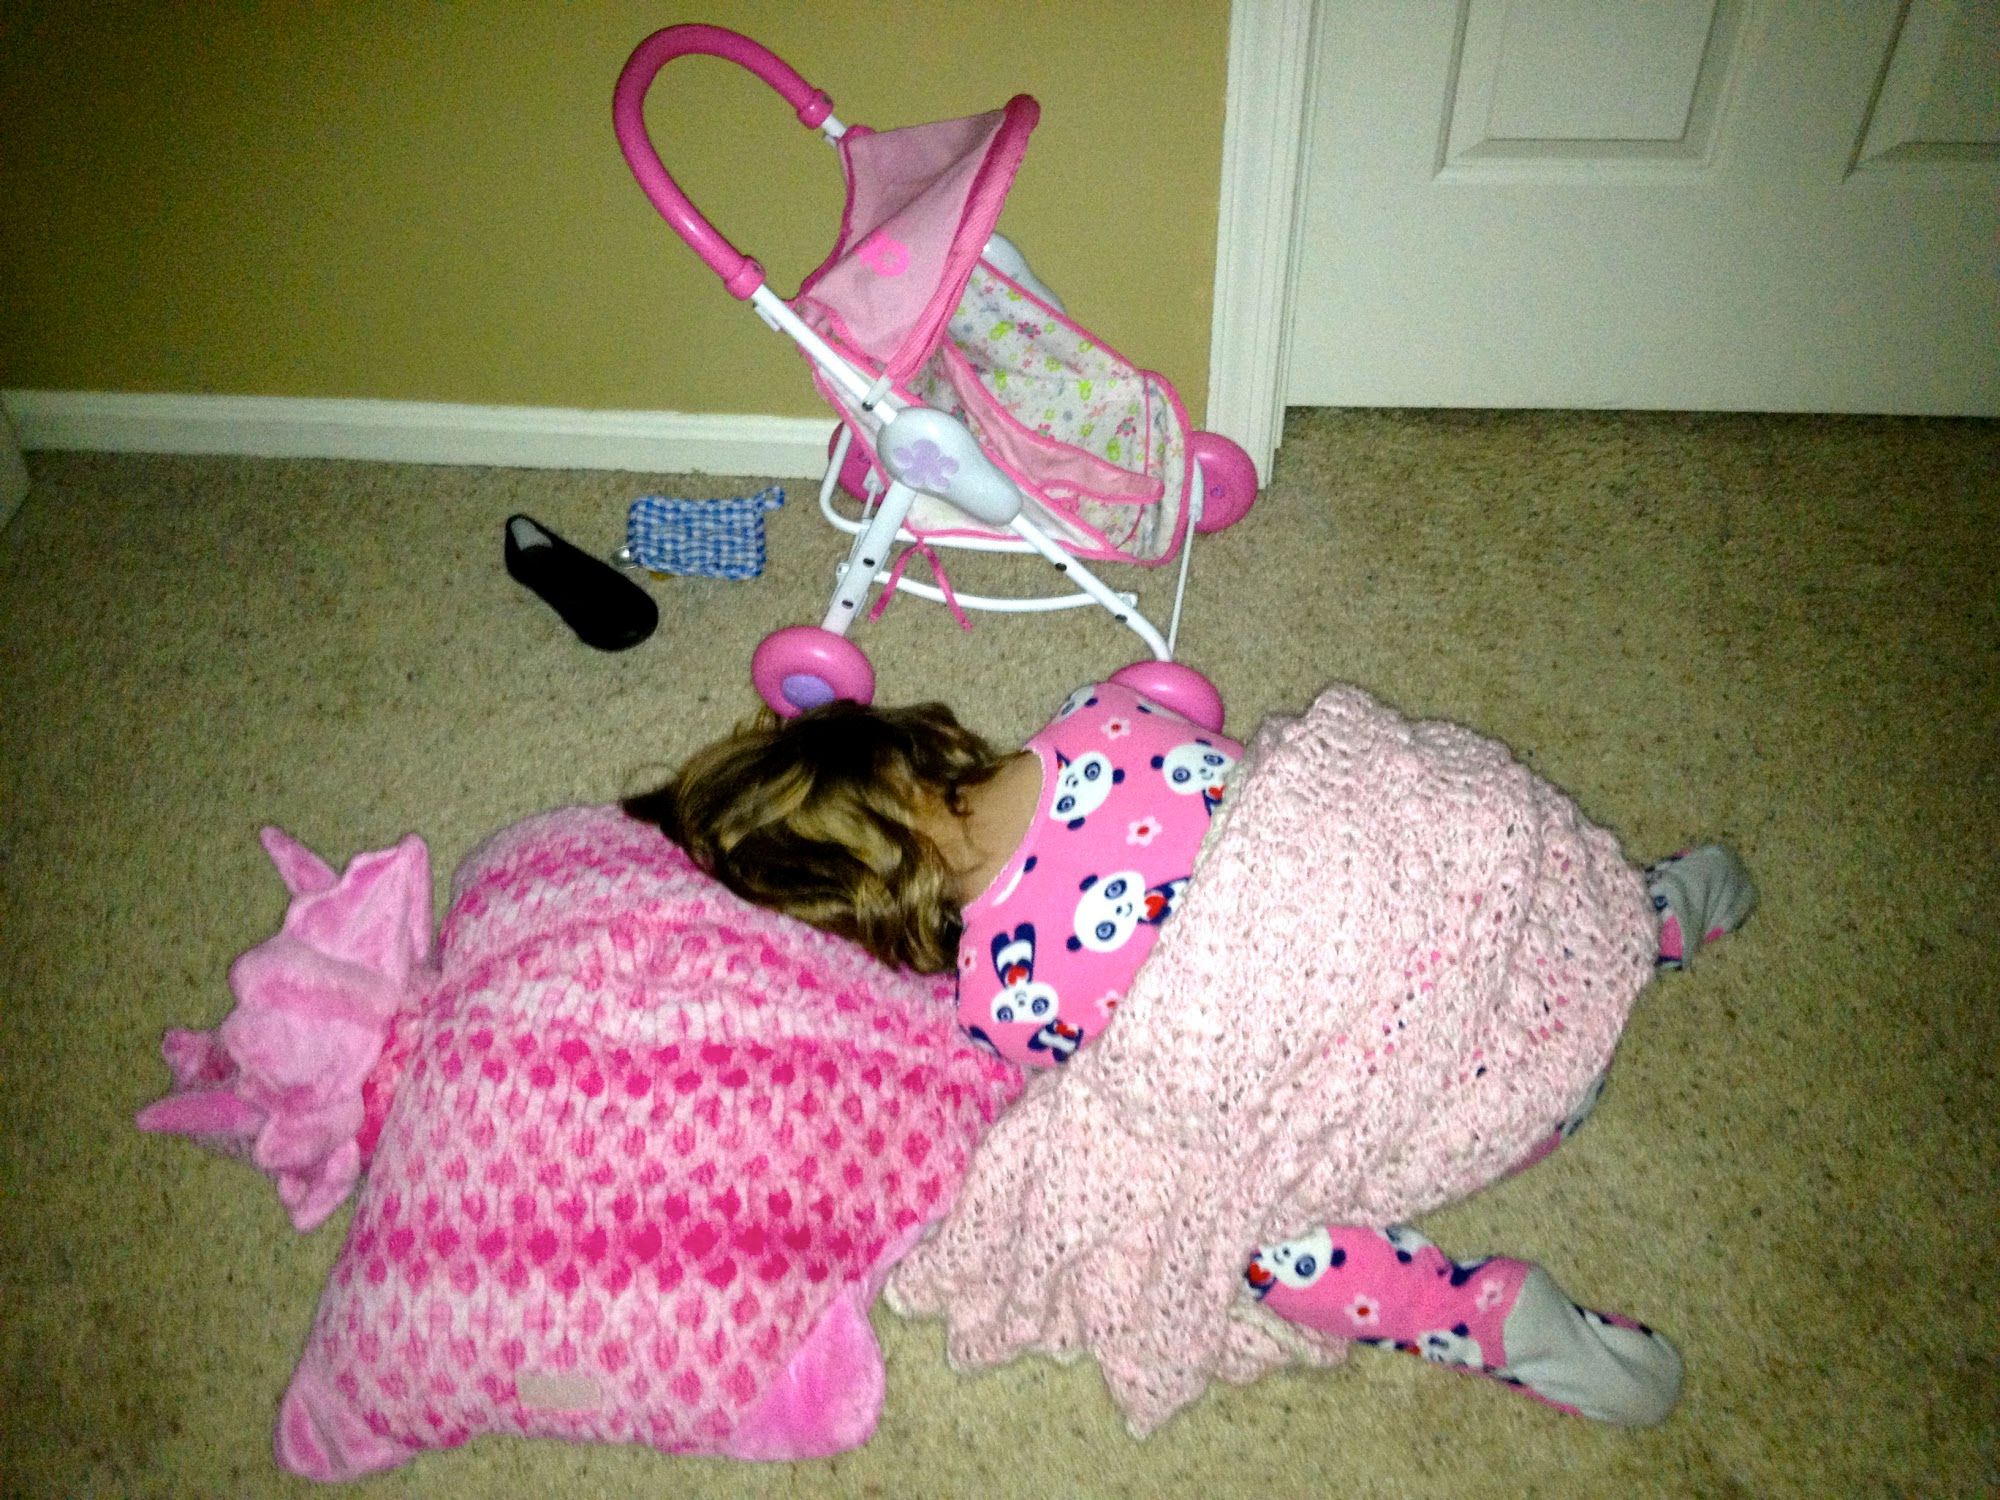  In the upstairs hallway between all 3 bedrooms.This is because I told her that I didn't want to find her in my bed when I came upstairs  to go to bed.Take that, Mommy!She's quite comfortable with her pillow pet and blankie. 